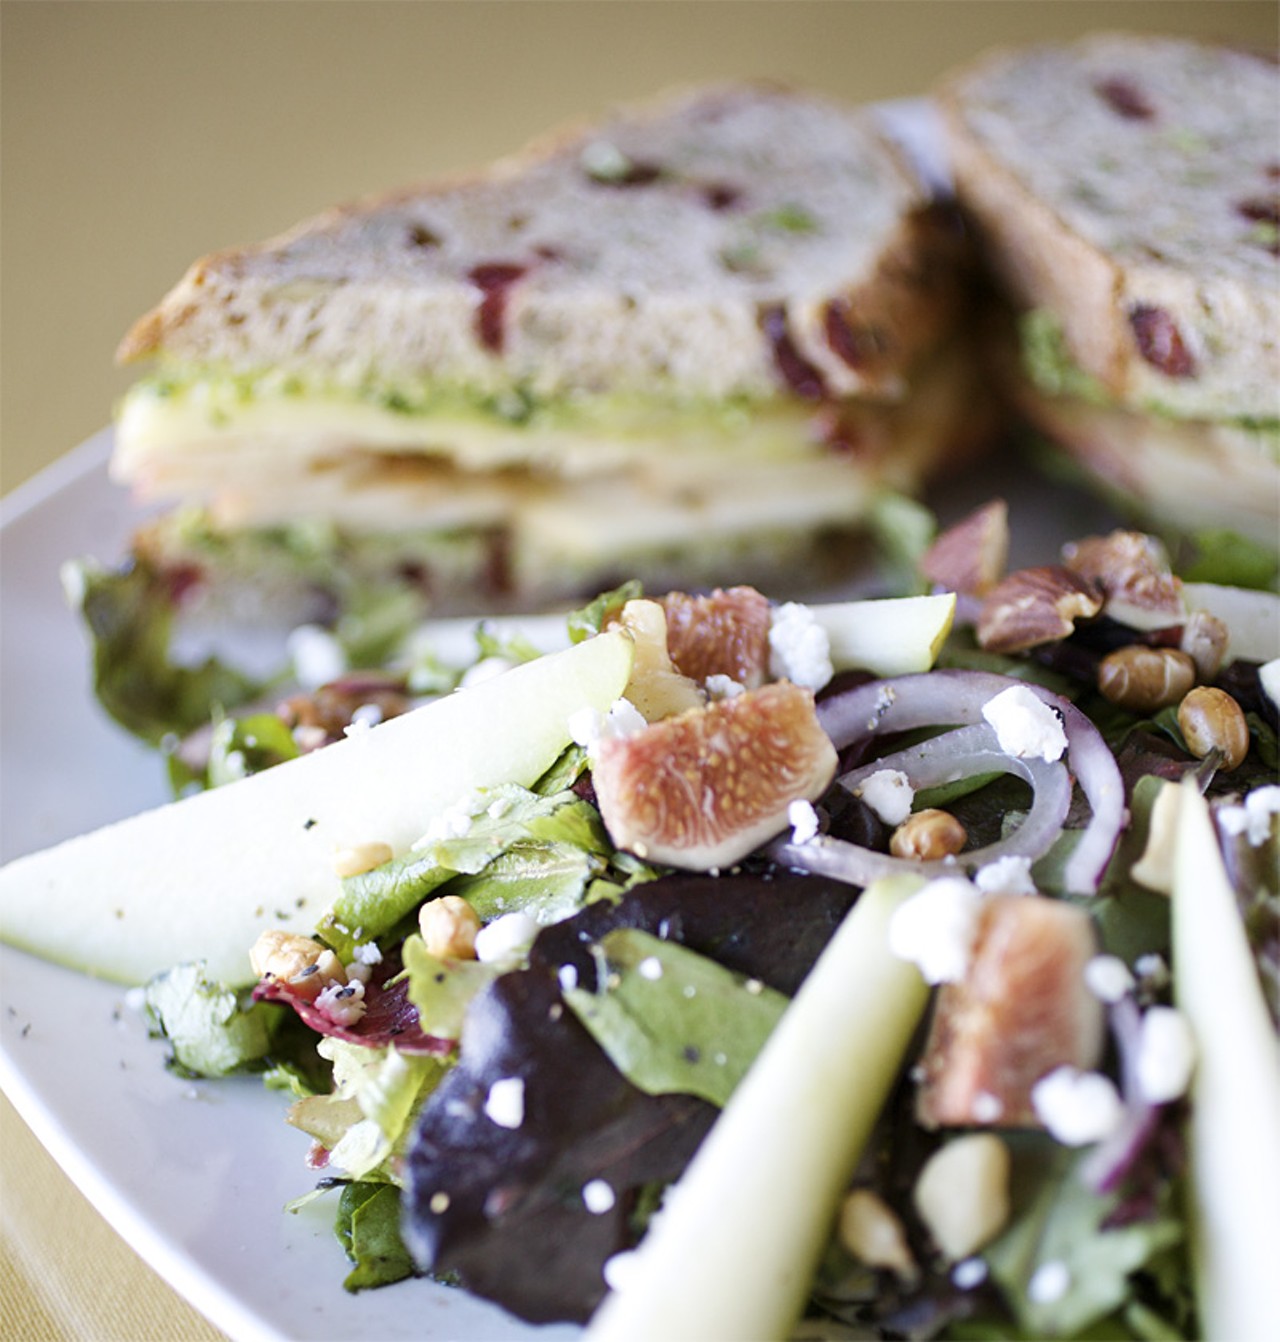 The Harvest Salad is prepared with fresh organic herbed spring mix, organic pears and figs, red onion, gorgonzola, dried fruit, seed and nut mixture tossed in house made cranberry vinaigrette. Shown here with the Orchard Melt sandwich.